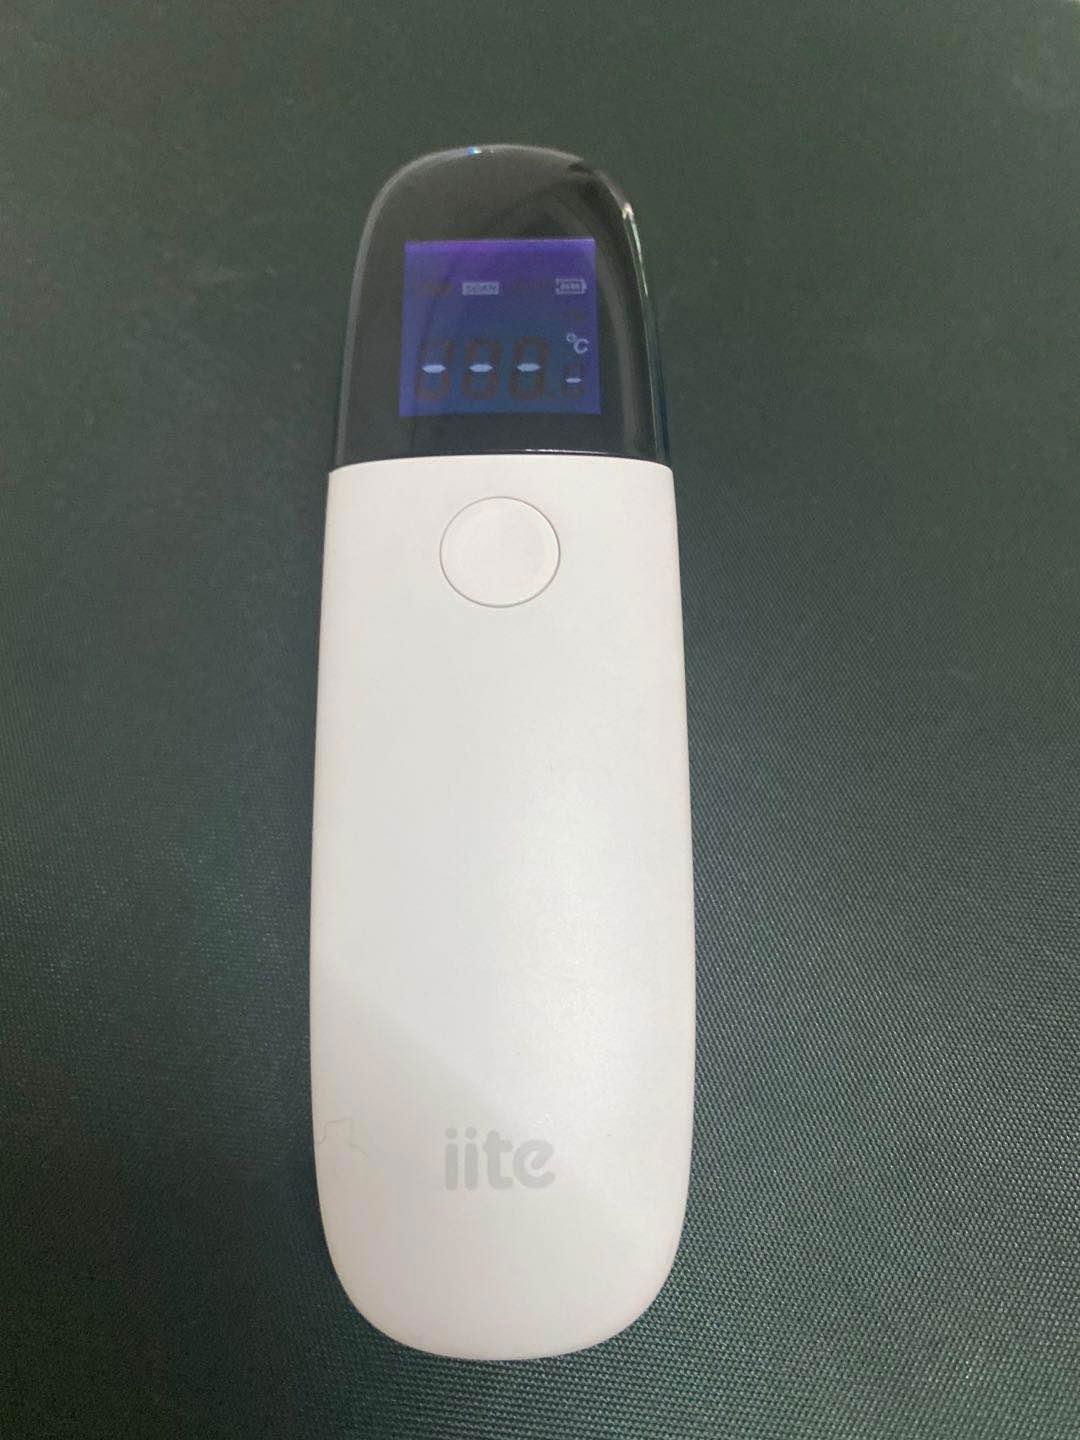 Iite forehead gun electronic temperature thermometer 2